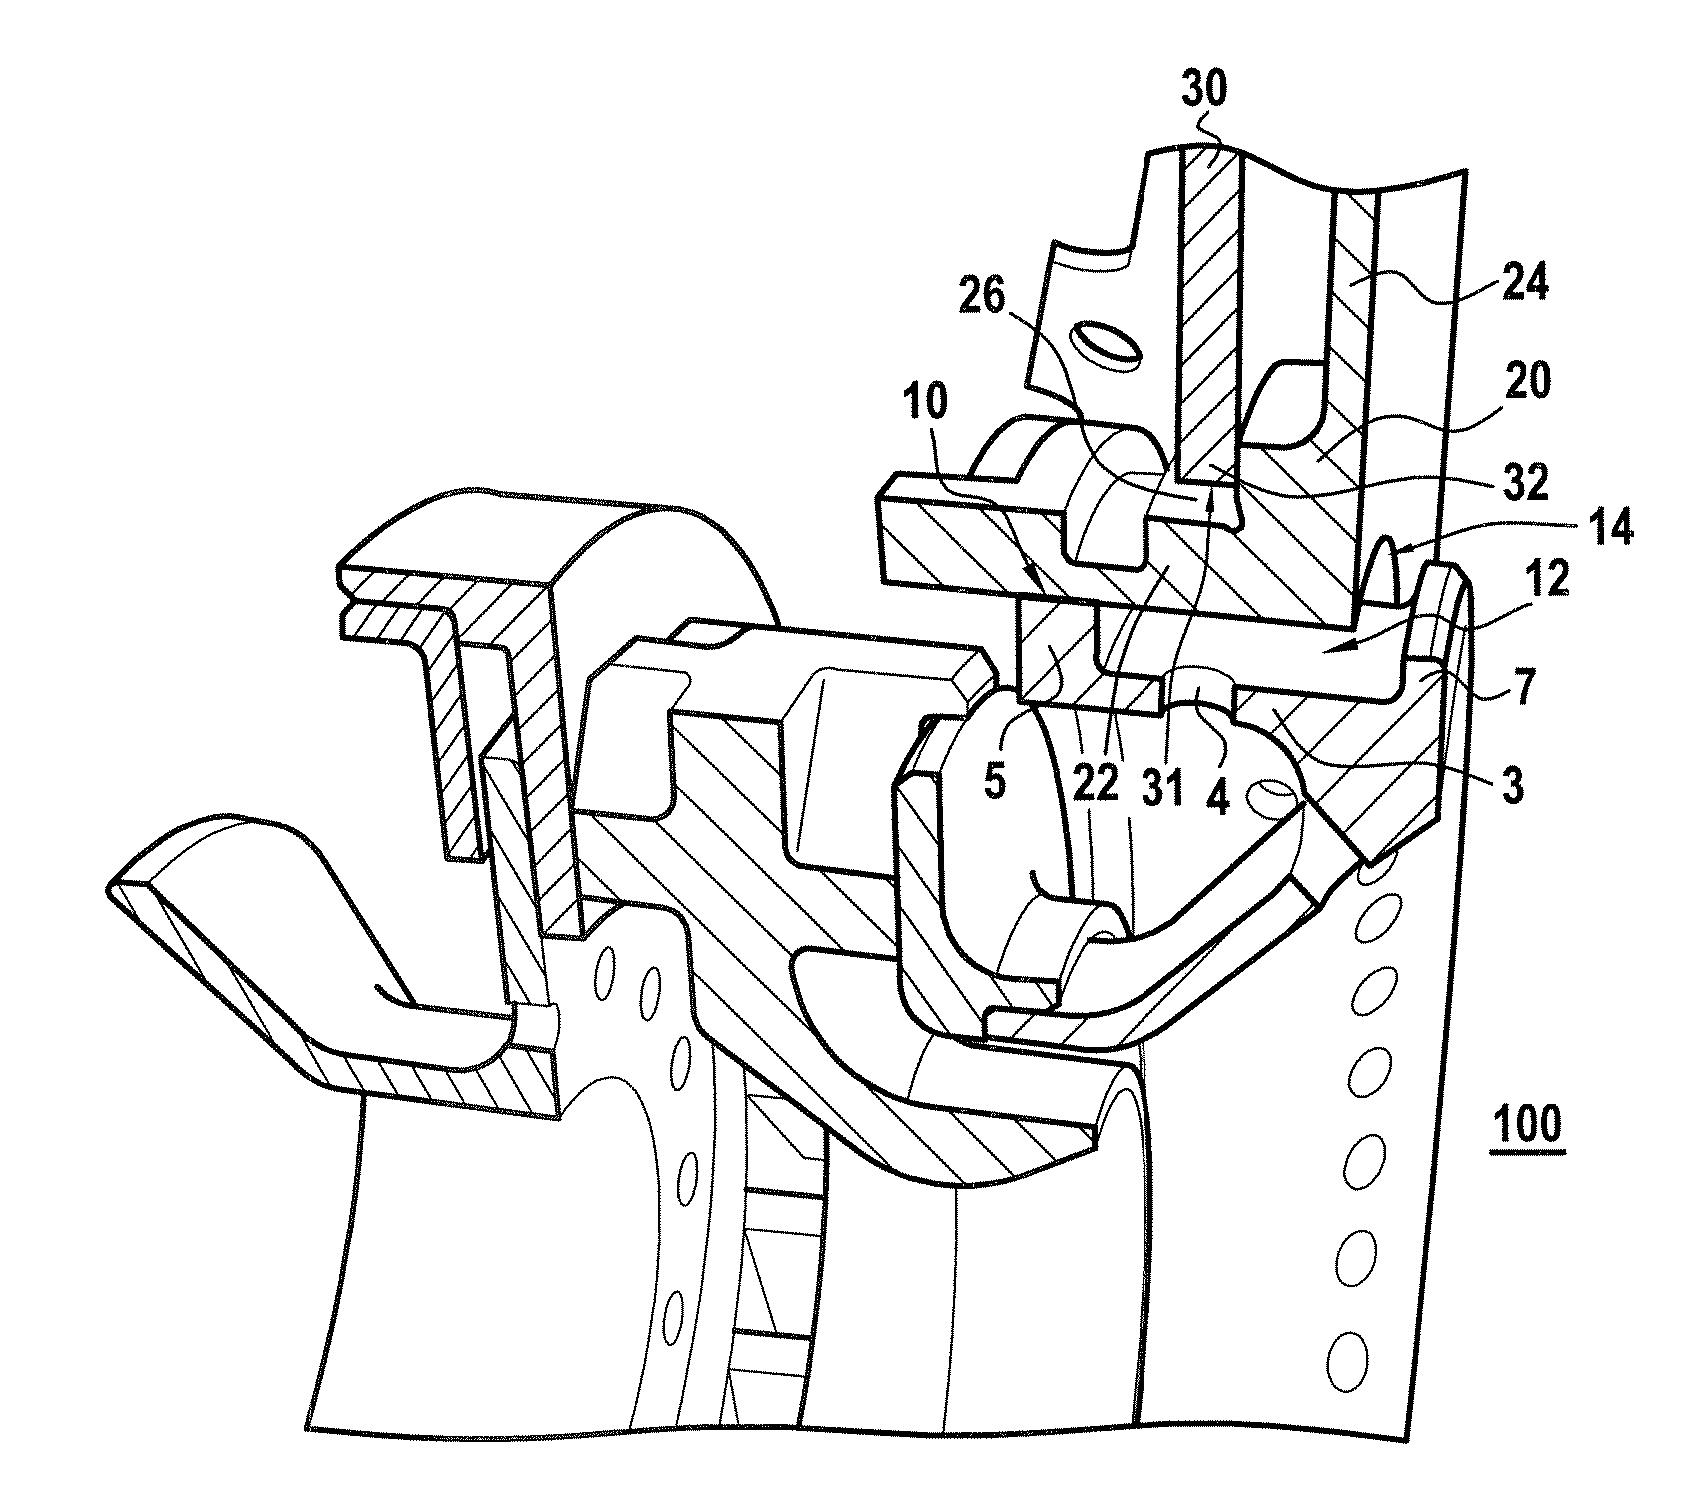 Combustion chamber end wall with ventilation